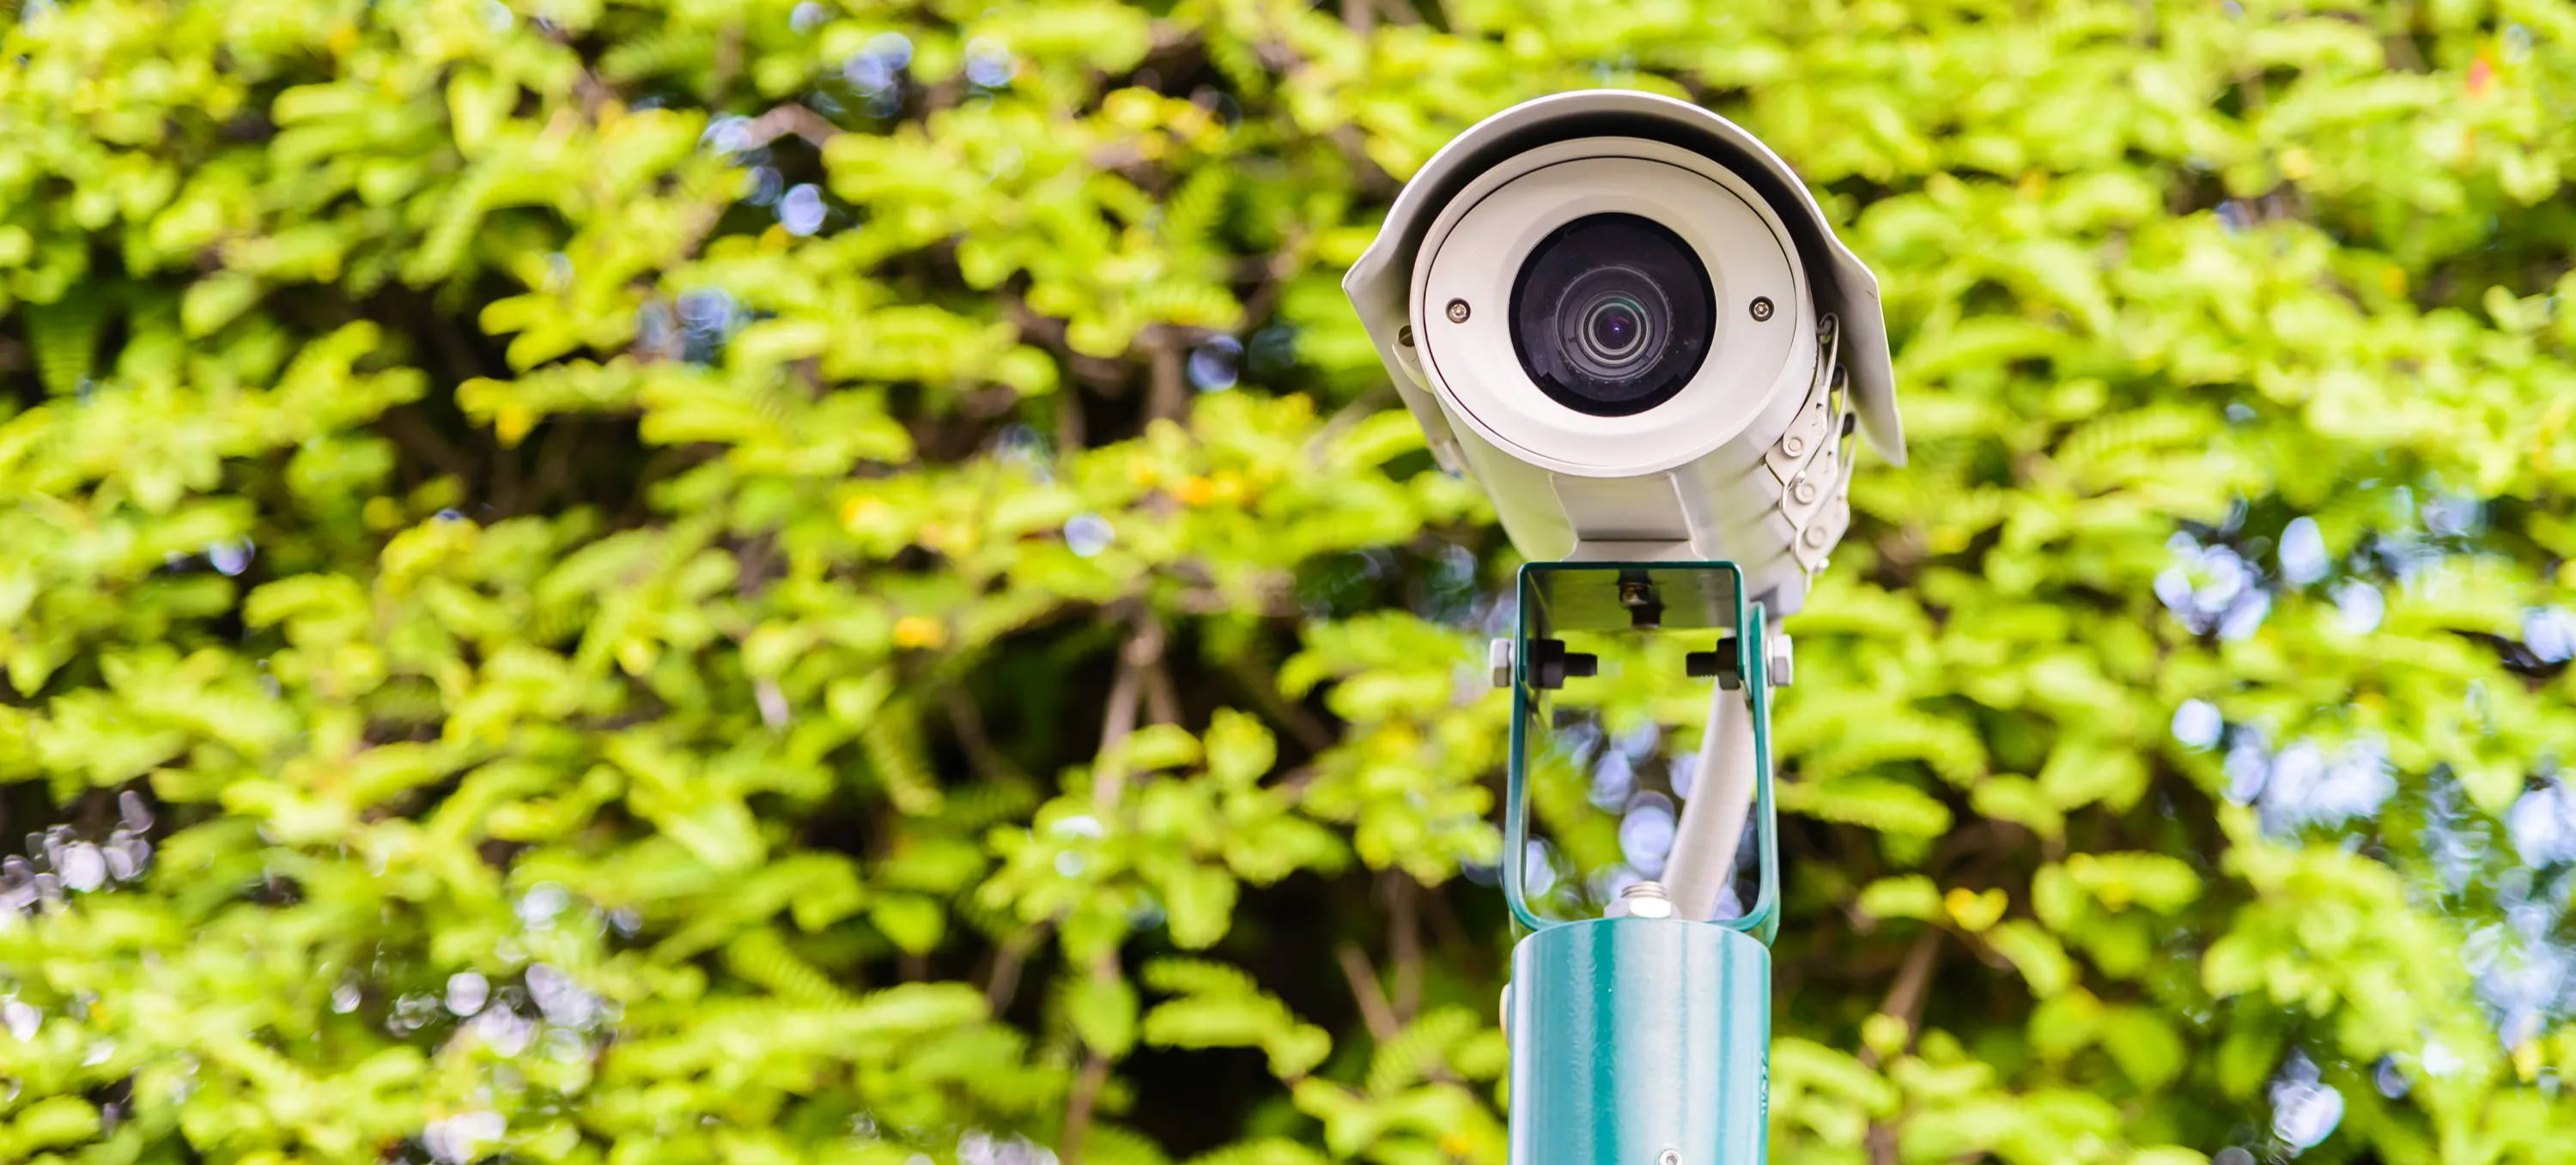 CCTV Cameras are a Great Ally for Protecting a Business